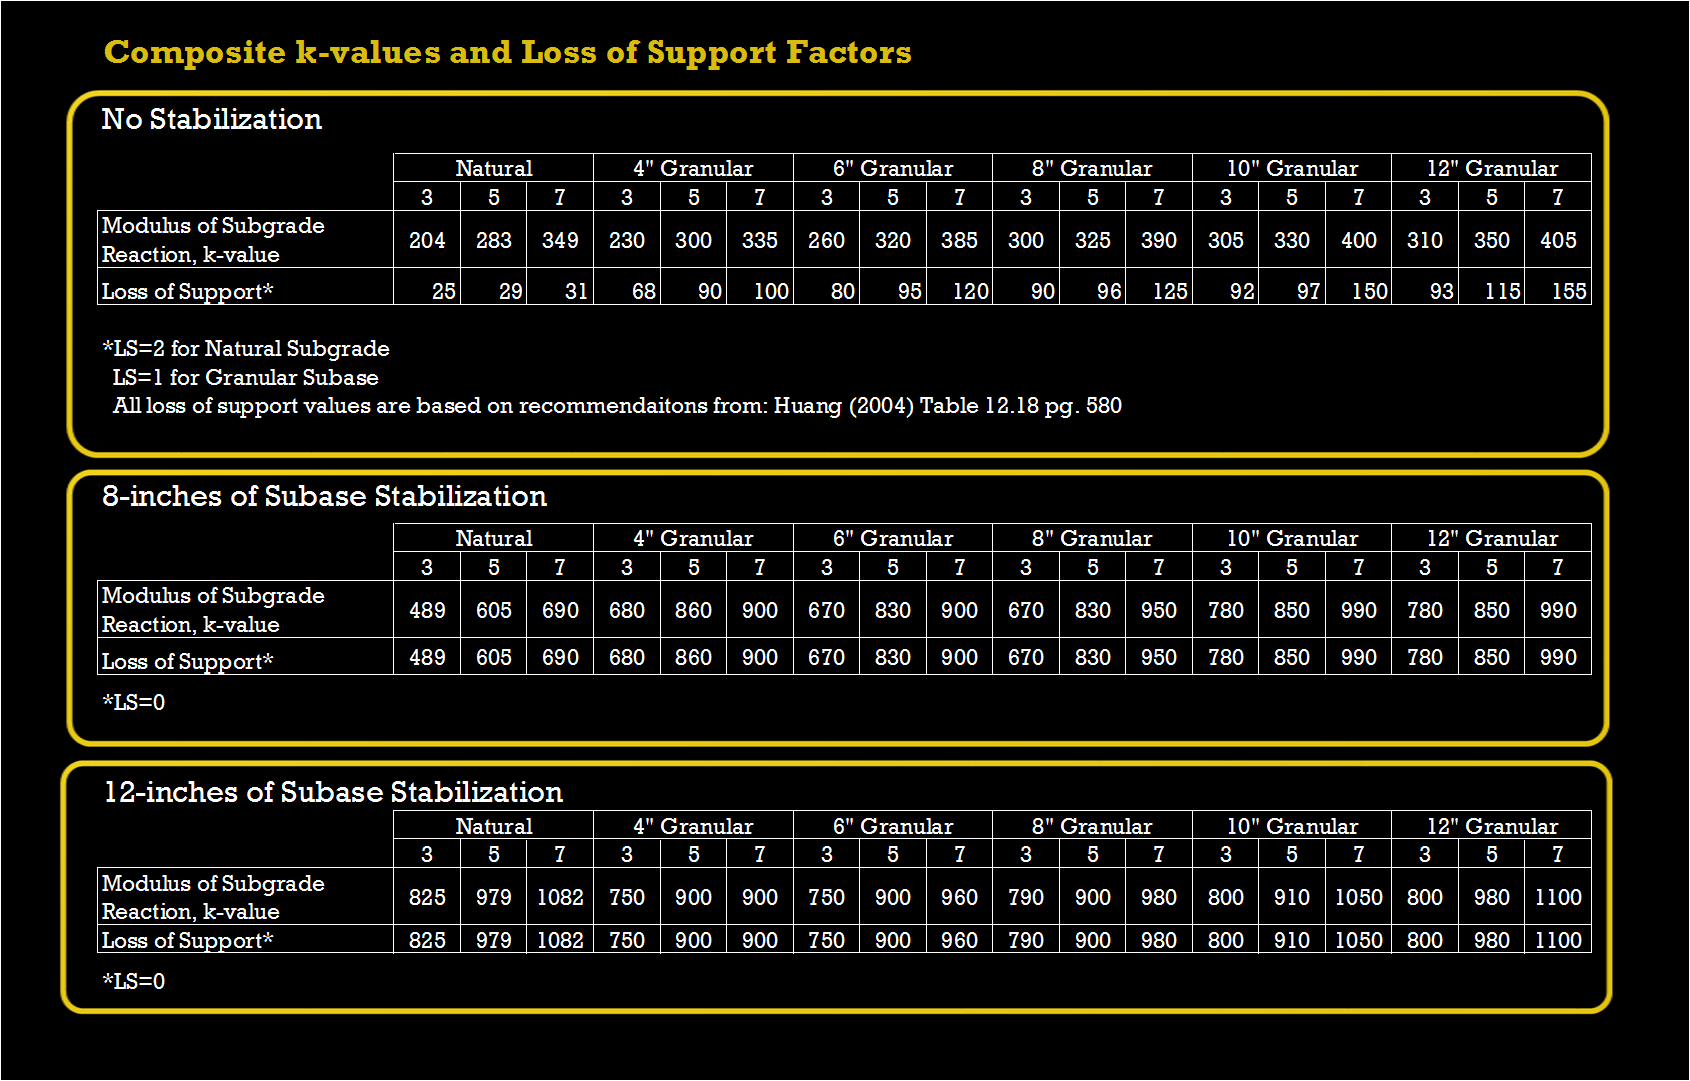 K-Values and Loss of Support Factors